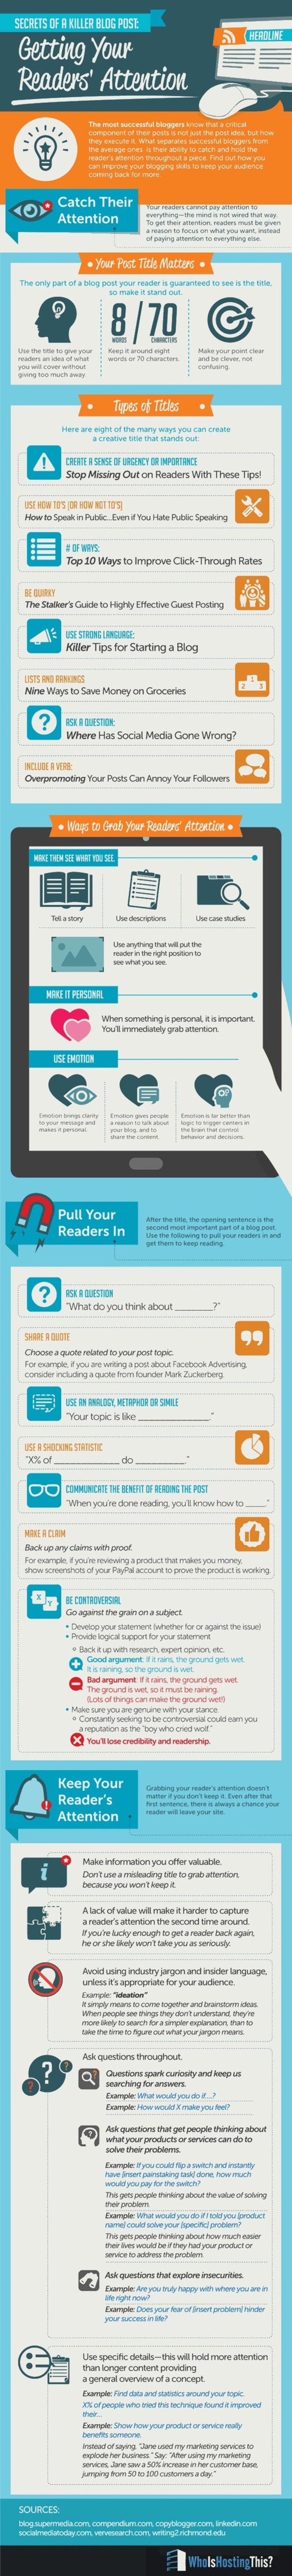 The Secrets to Writing an Attention-Grabbing Blog Post [Infographic] | Digital Social Media Marketing | Scoop.it